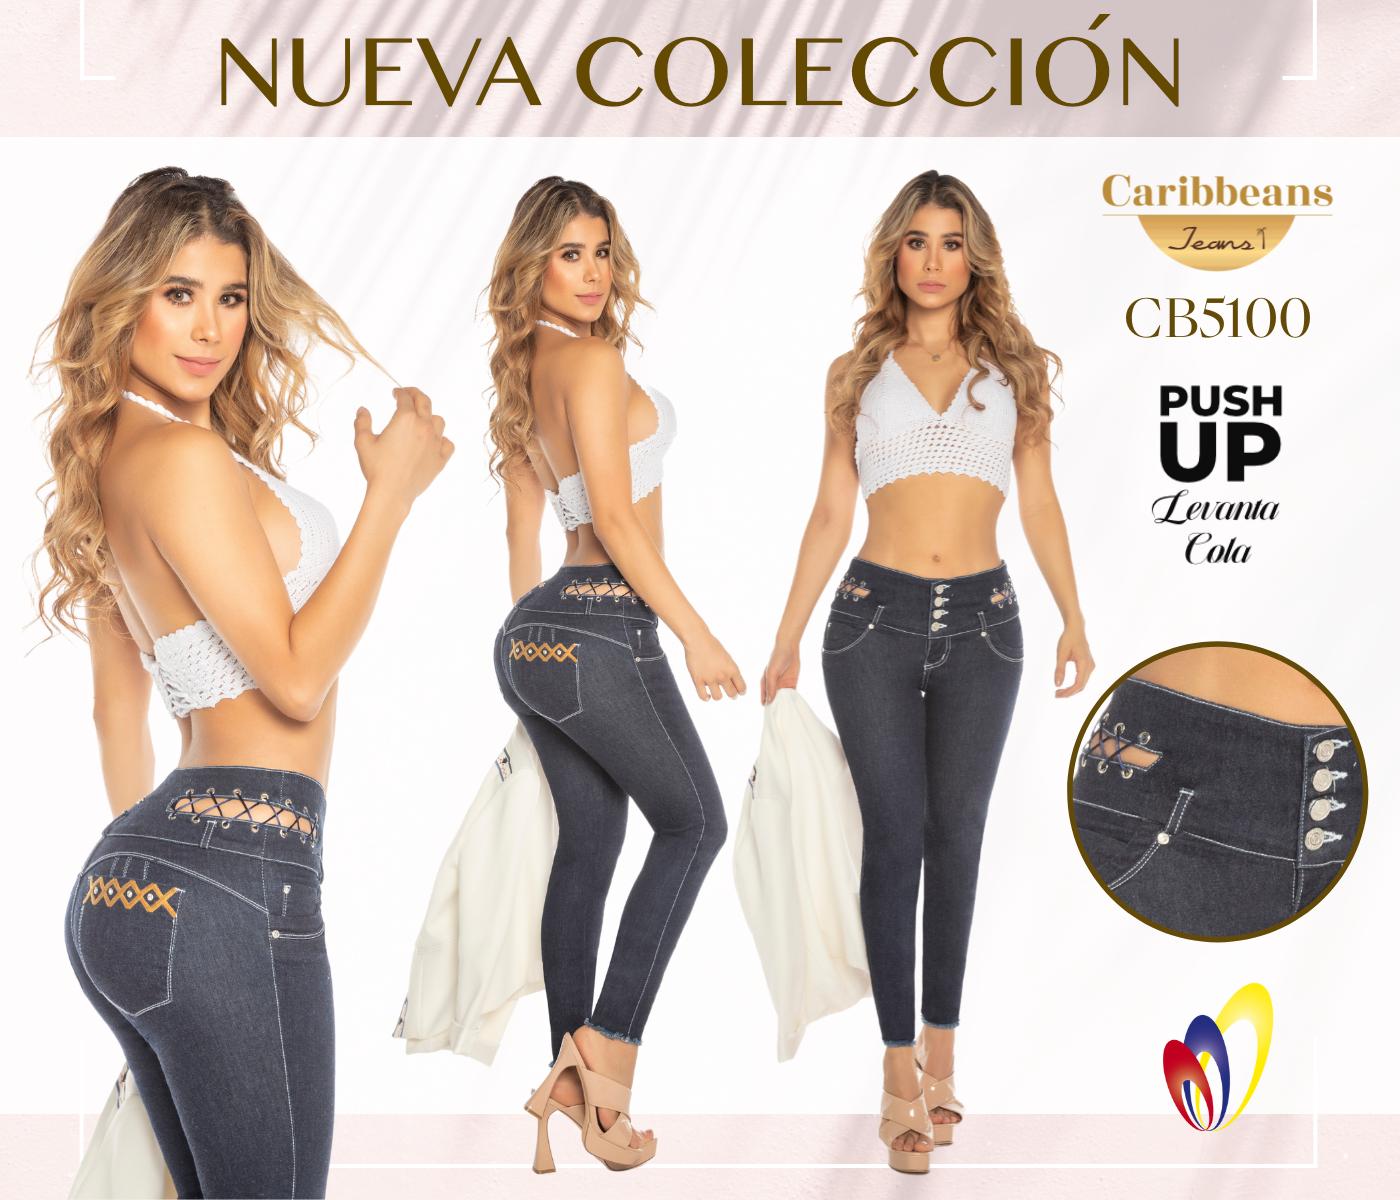 Jean colombiano push up